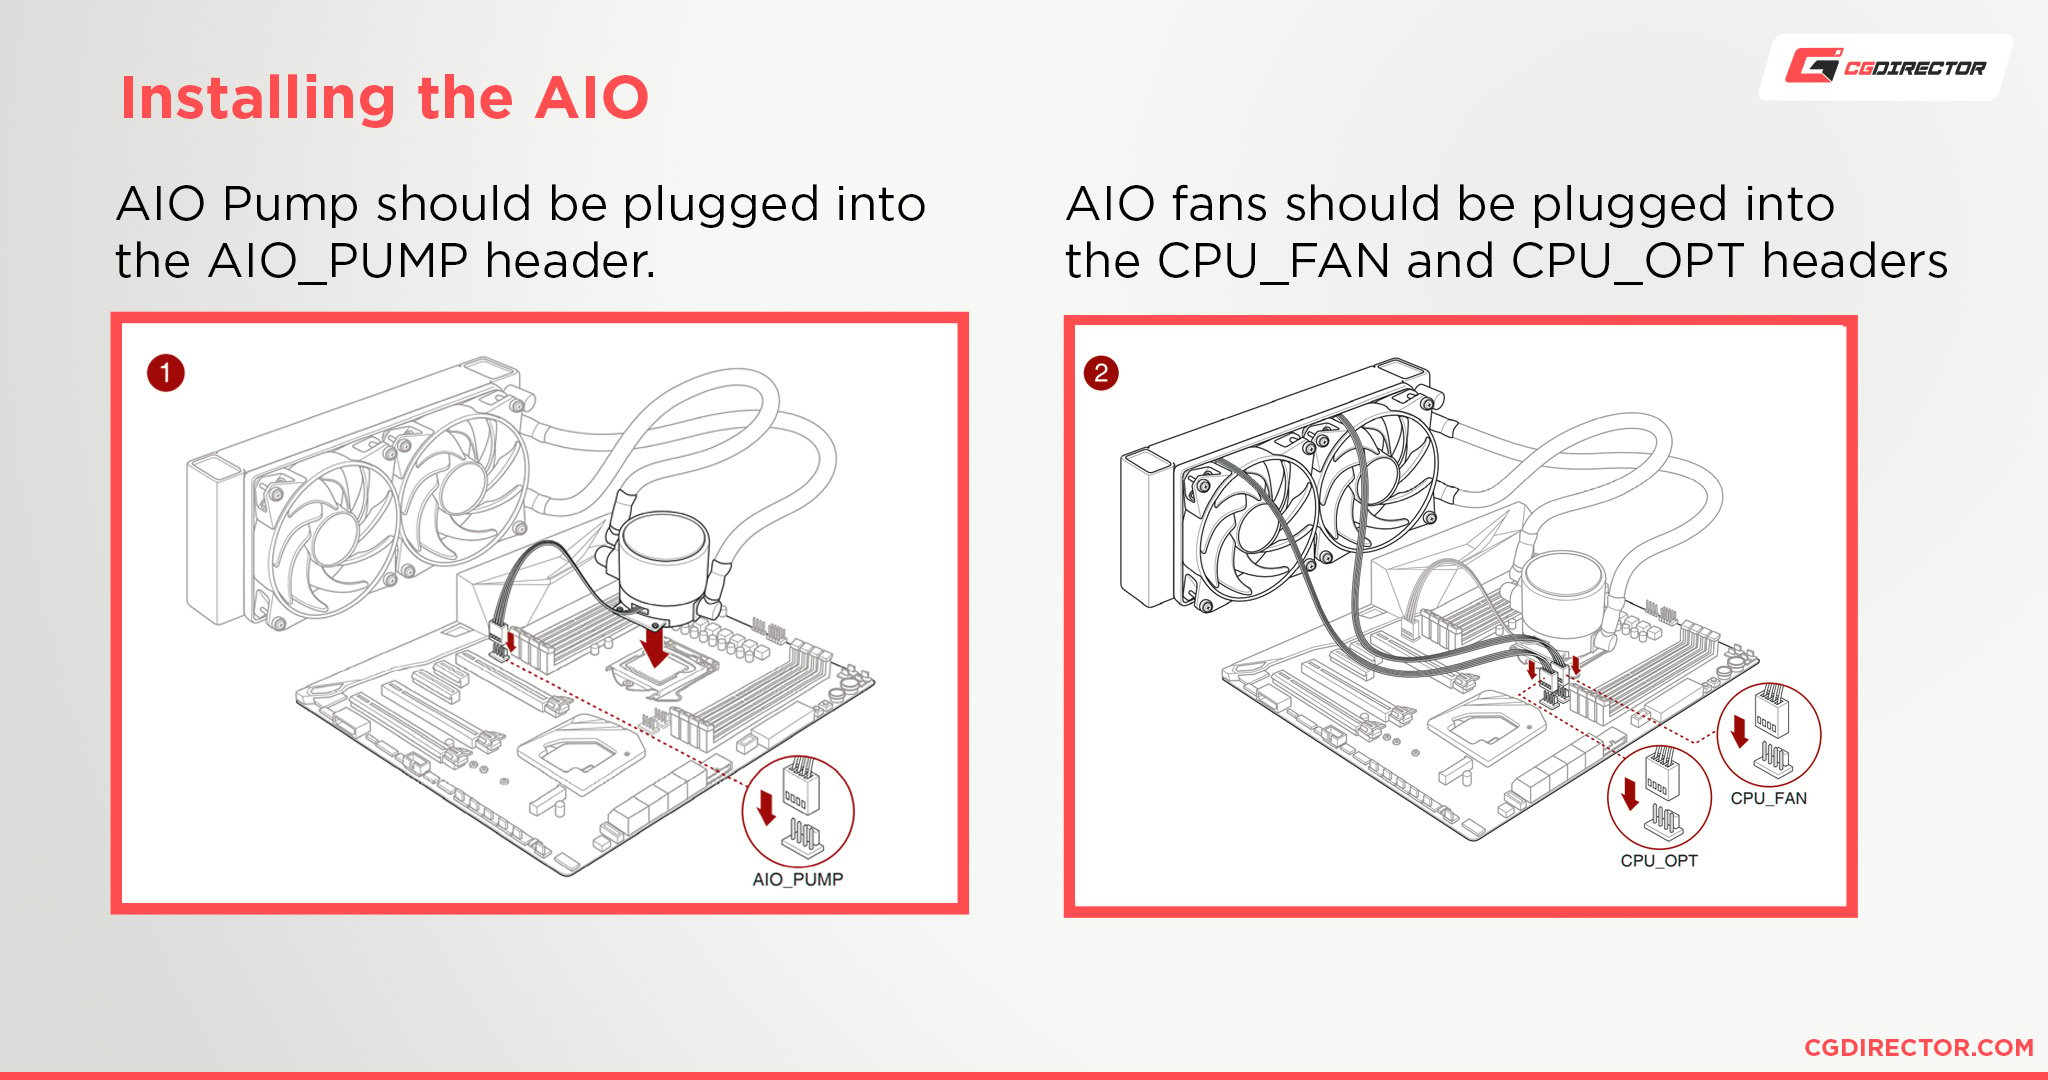 Installing the AIO